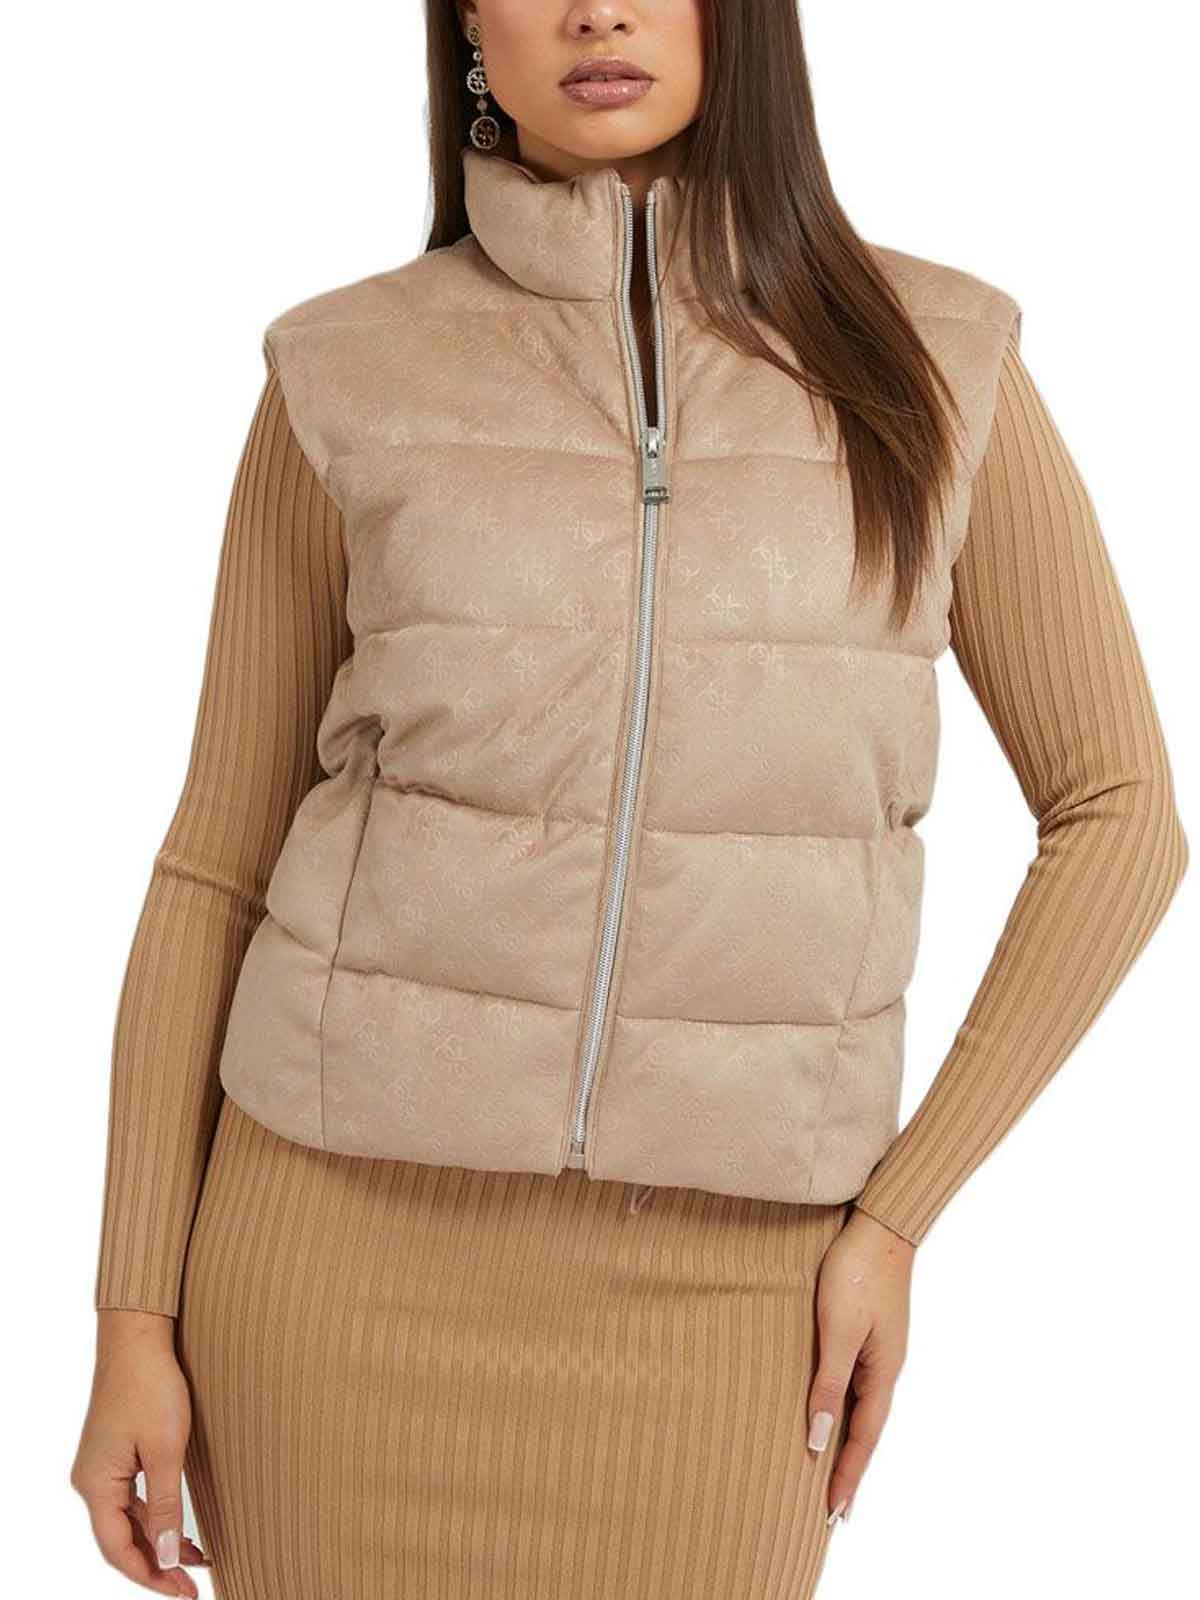   Guess | Jole Suede Puffer Vest |  